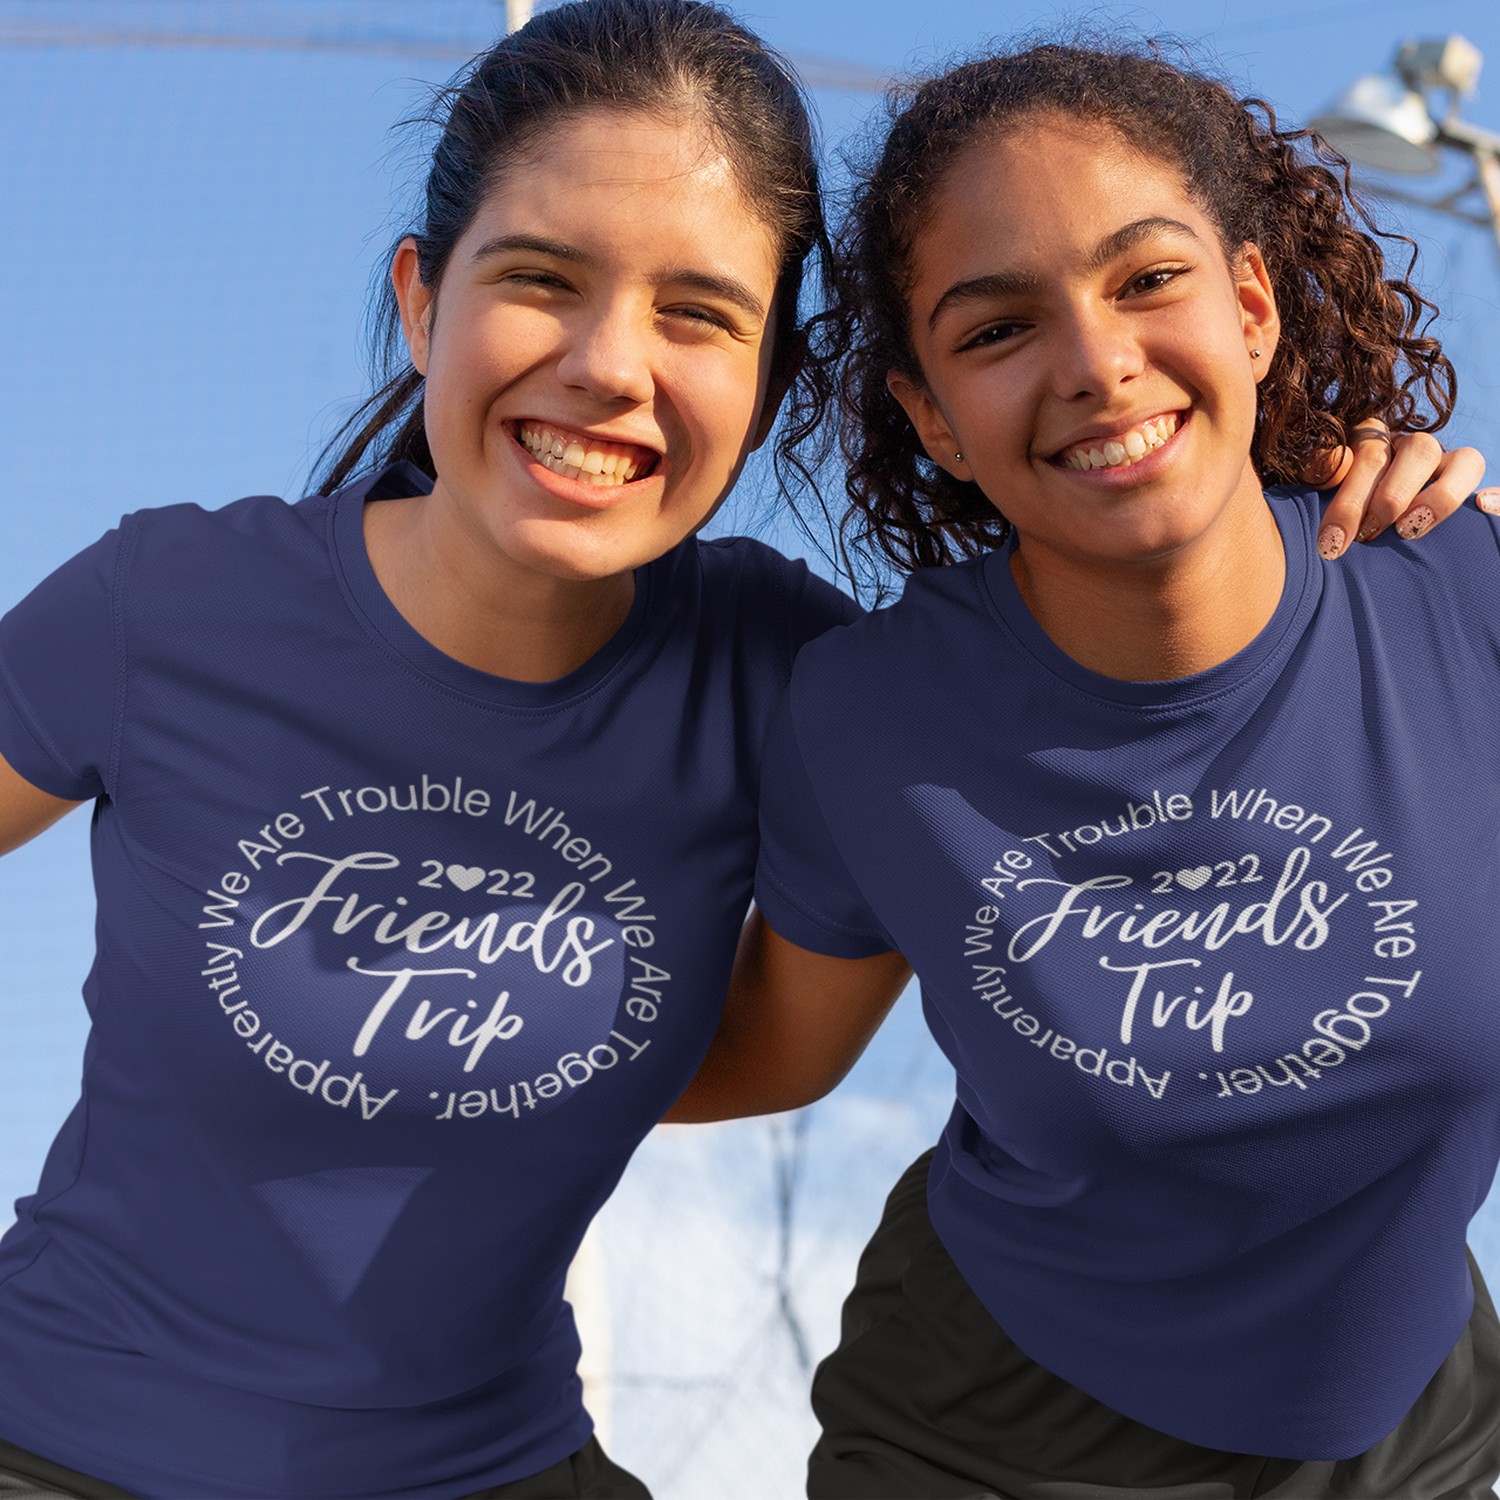 Friends Group Vacation T-Shirts - Group T-Shirts for Friends - Divine Bonds